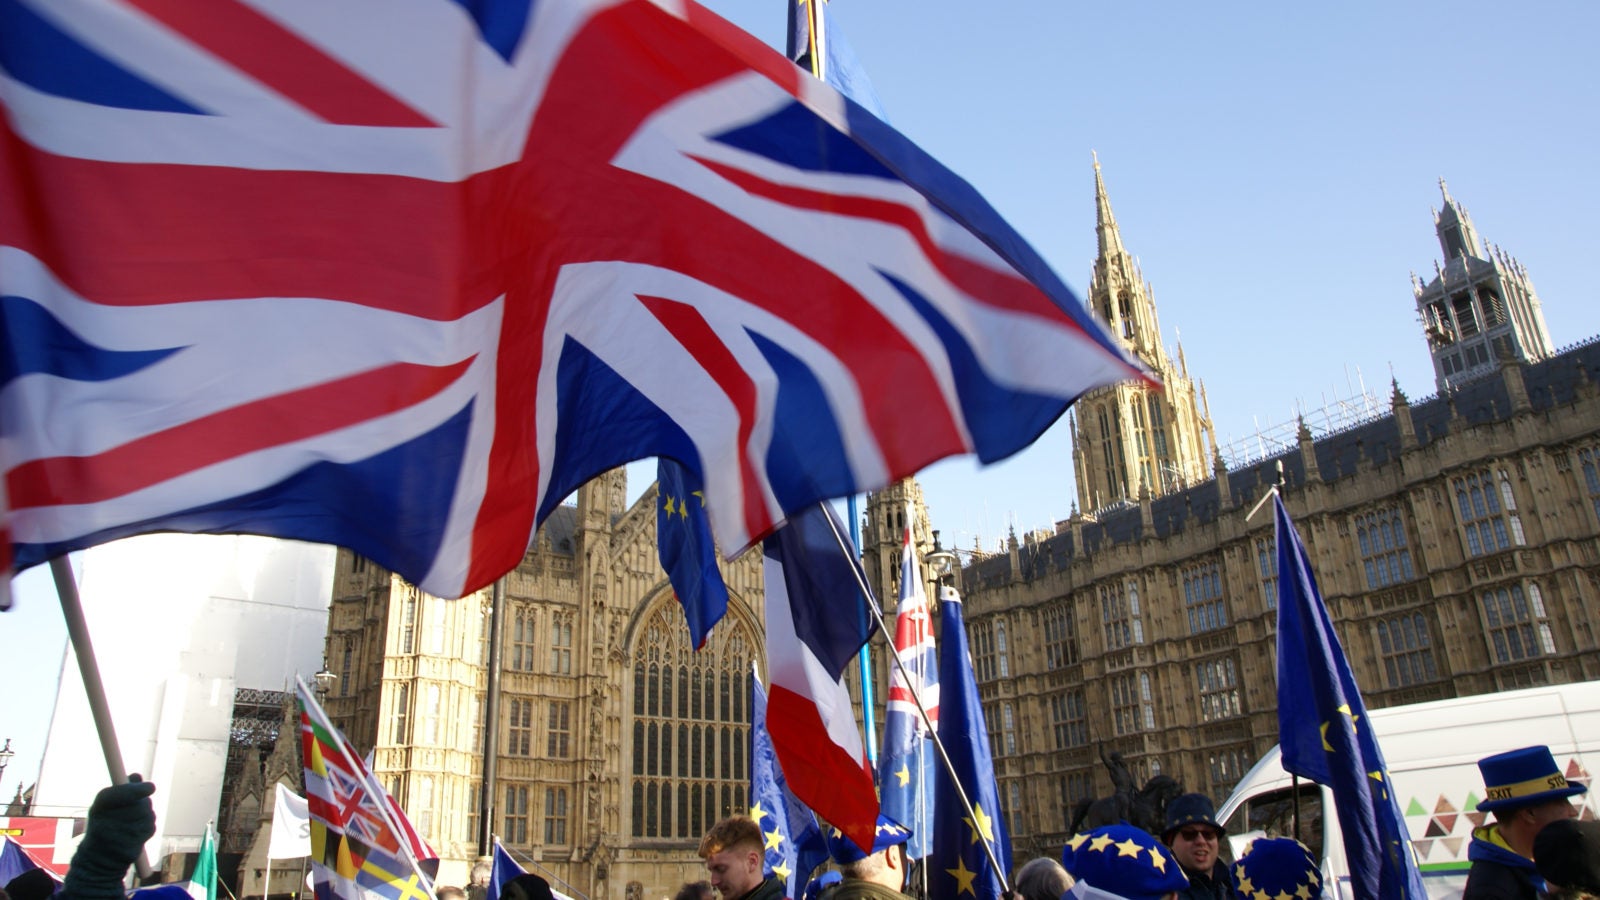 People stand with British and EU flags outside of Westminster Palace.